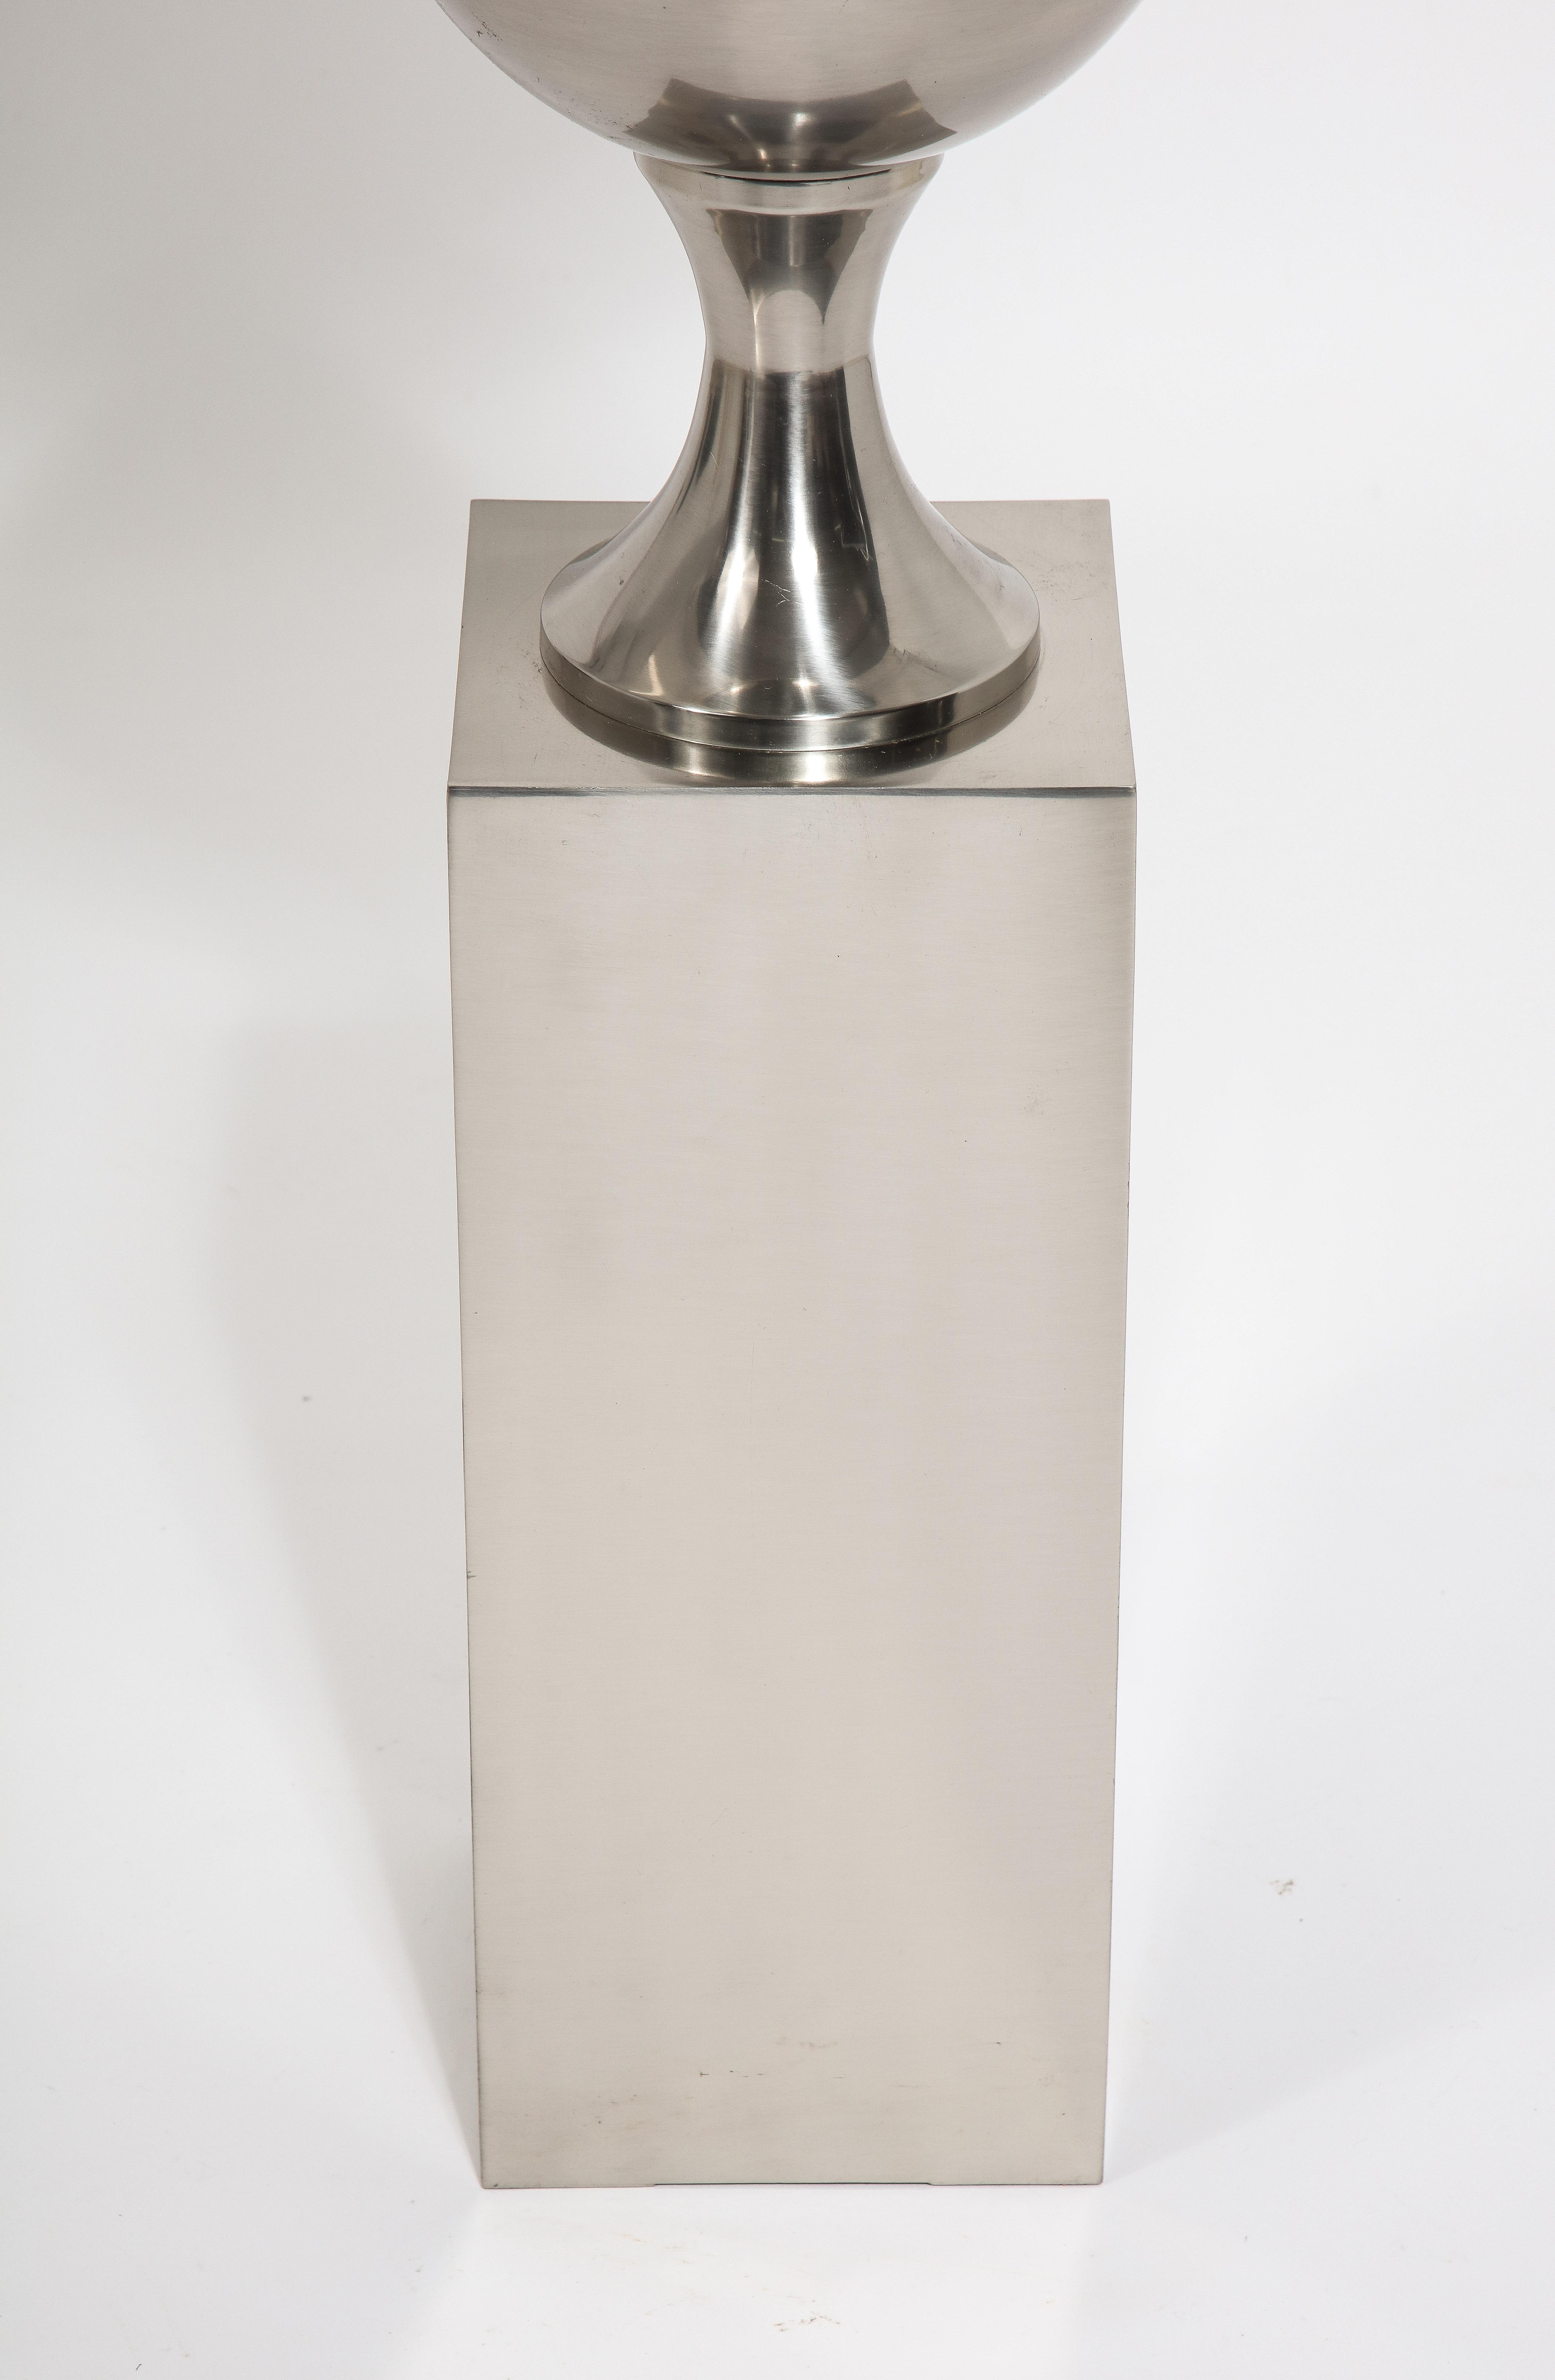 A rare and large floor lamp by Barbier in brushed nickel brass. This model is seen as a table lamp and rarely as a standing lamp. Shade not included, pictured for photographic purposes.